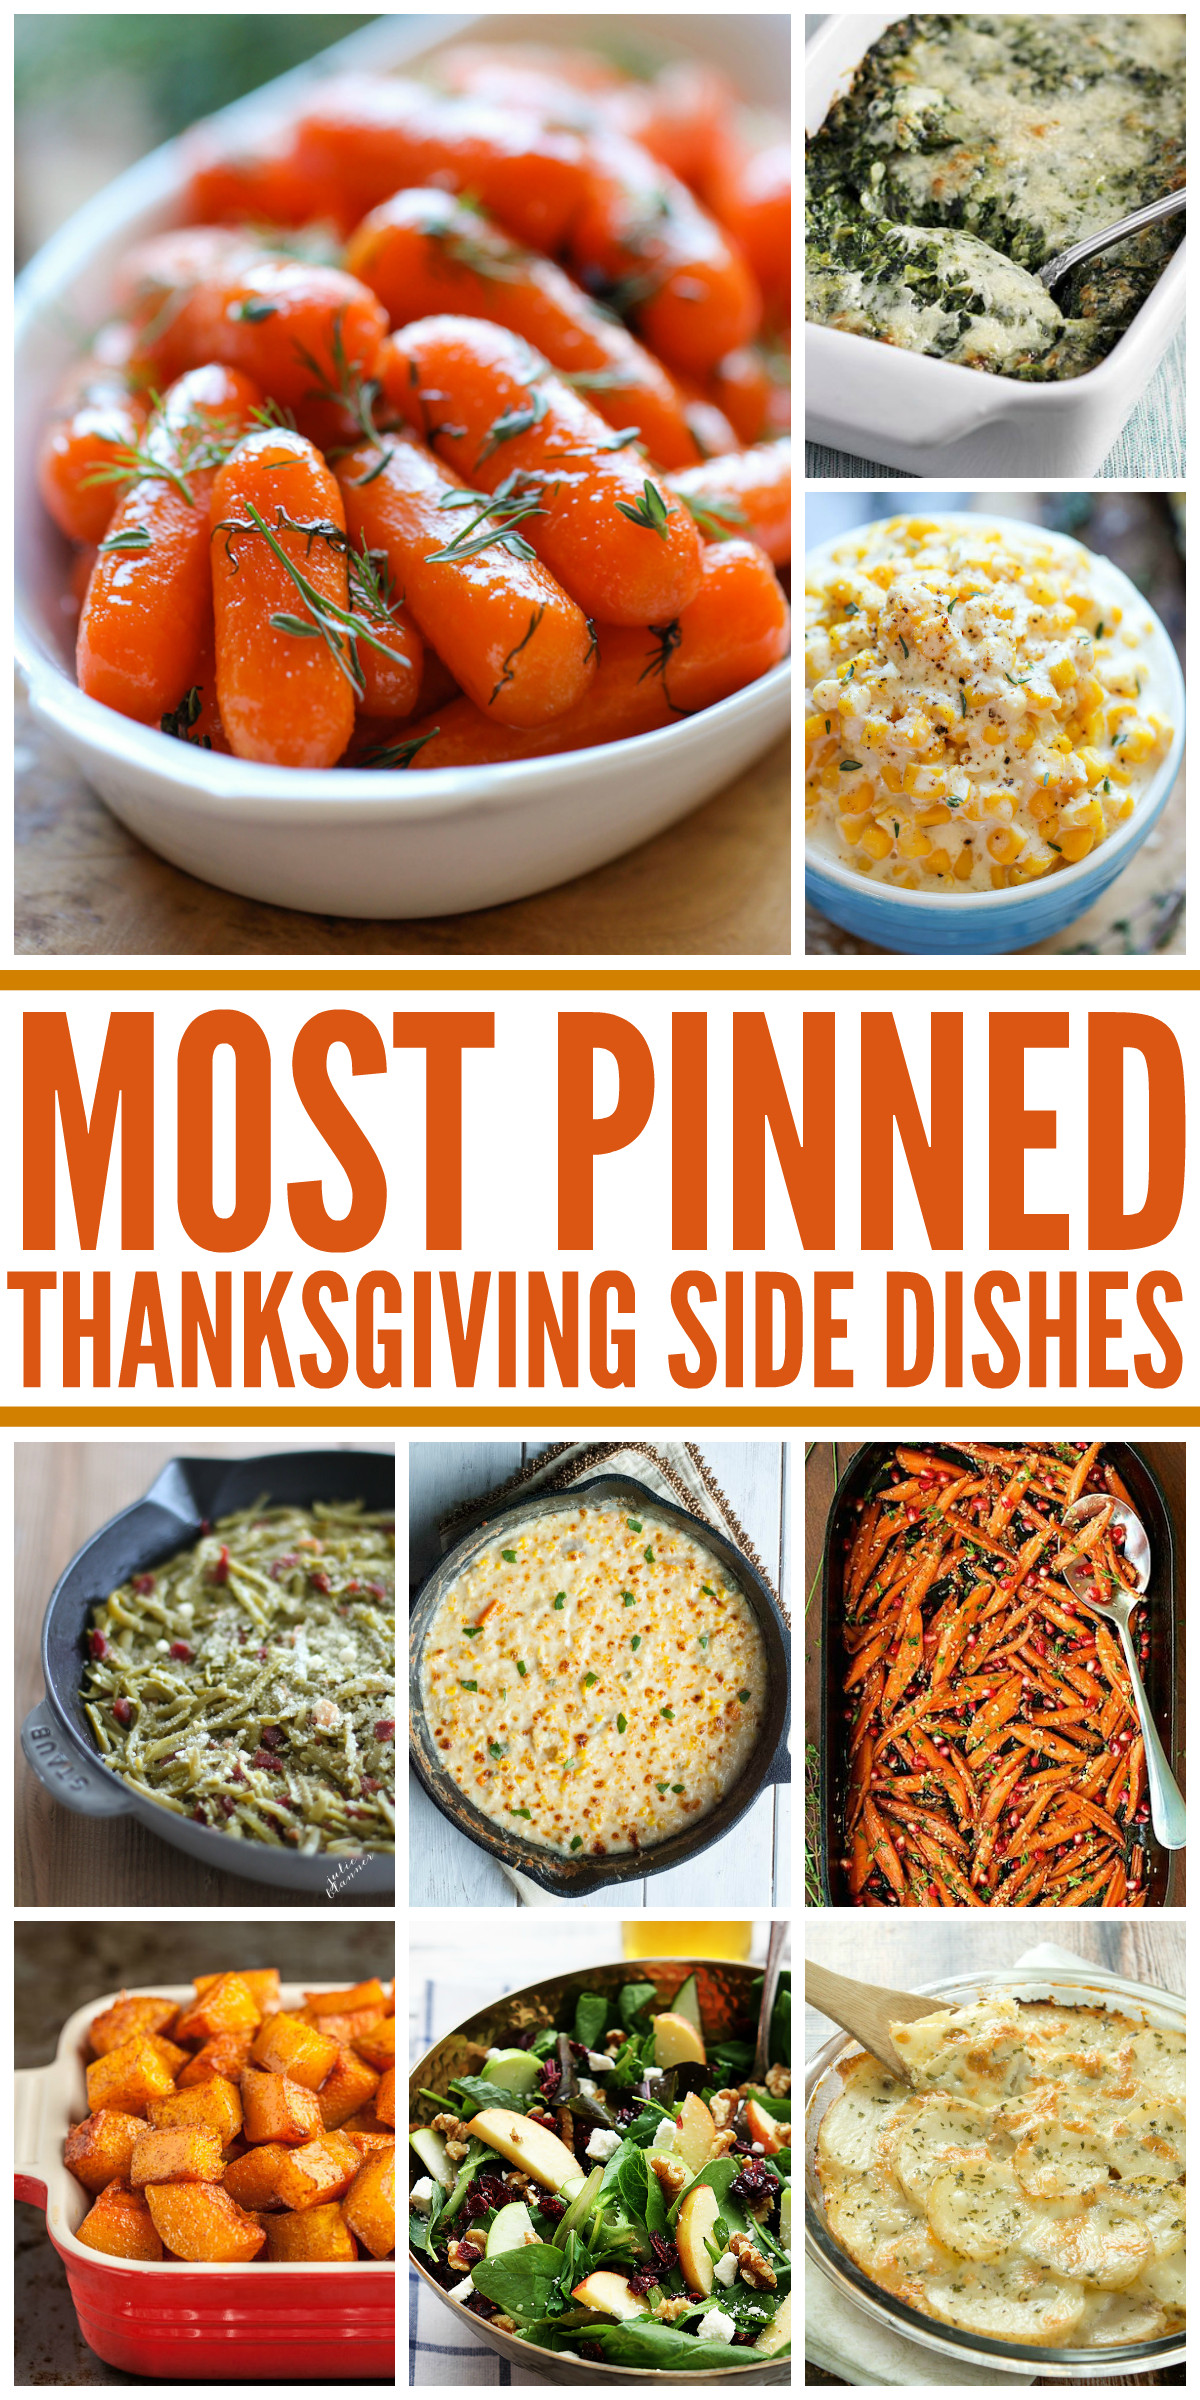 Turkey Dinner Sides
 25 Most Pinned Holiday Side Dishes